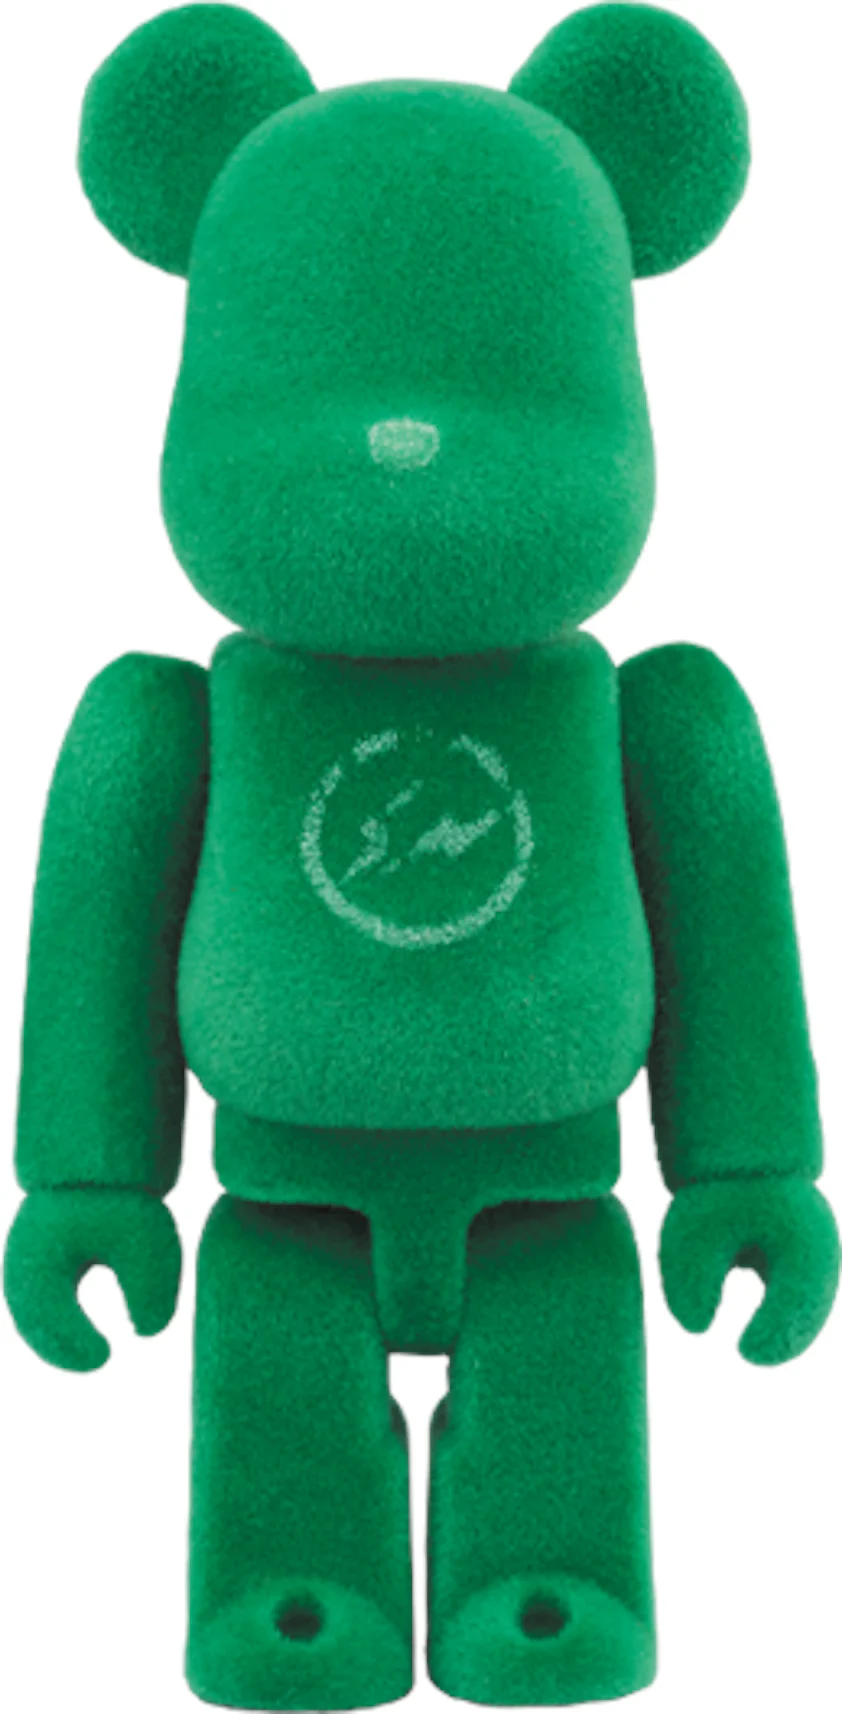 Bearbrick Fragment x The Park-Ing Ginza 100% Green